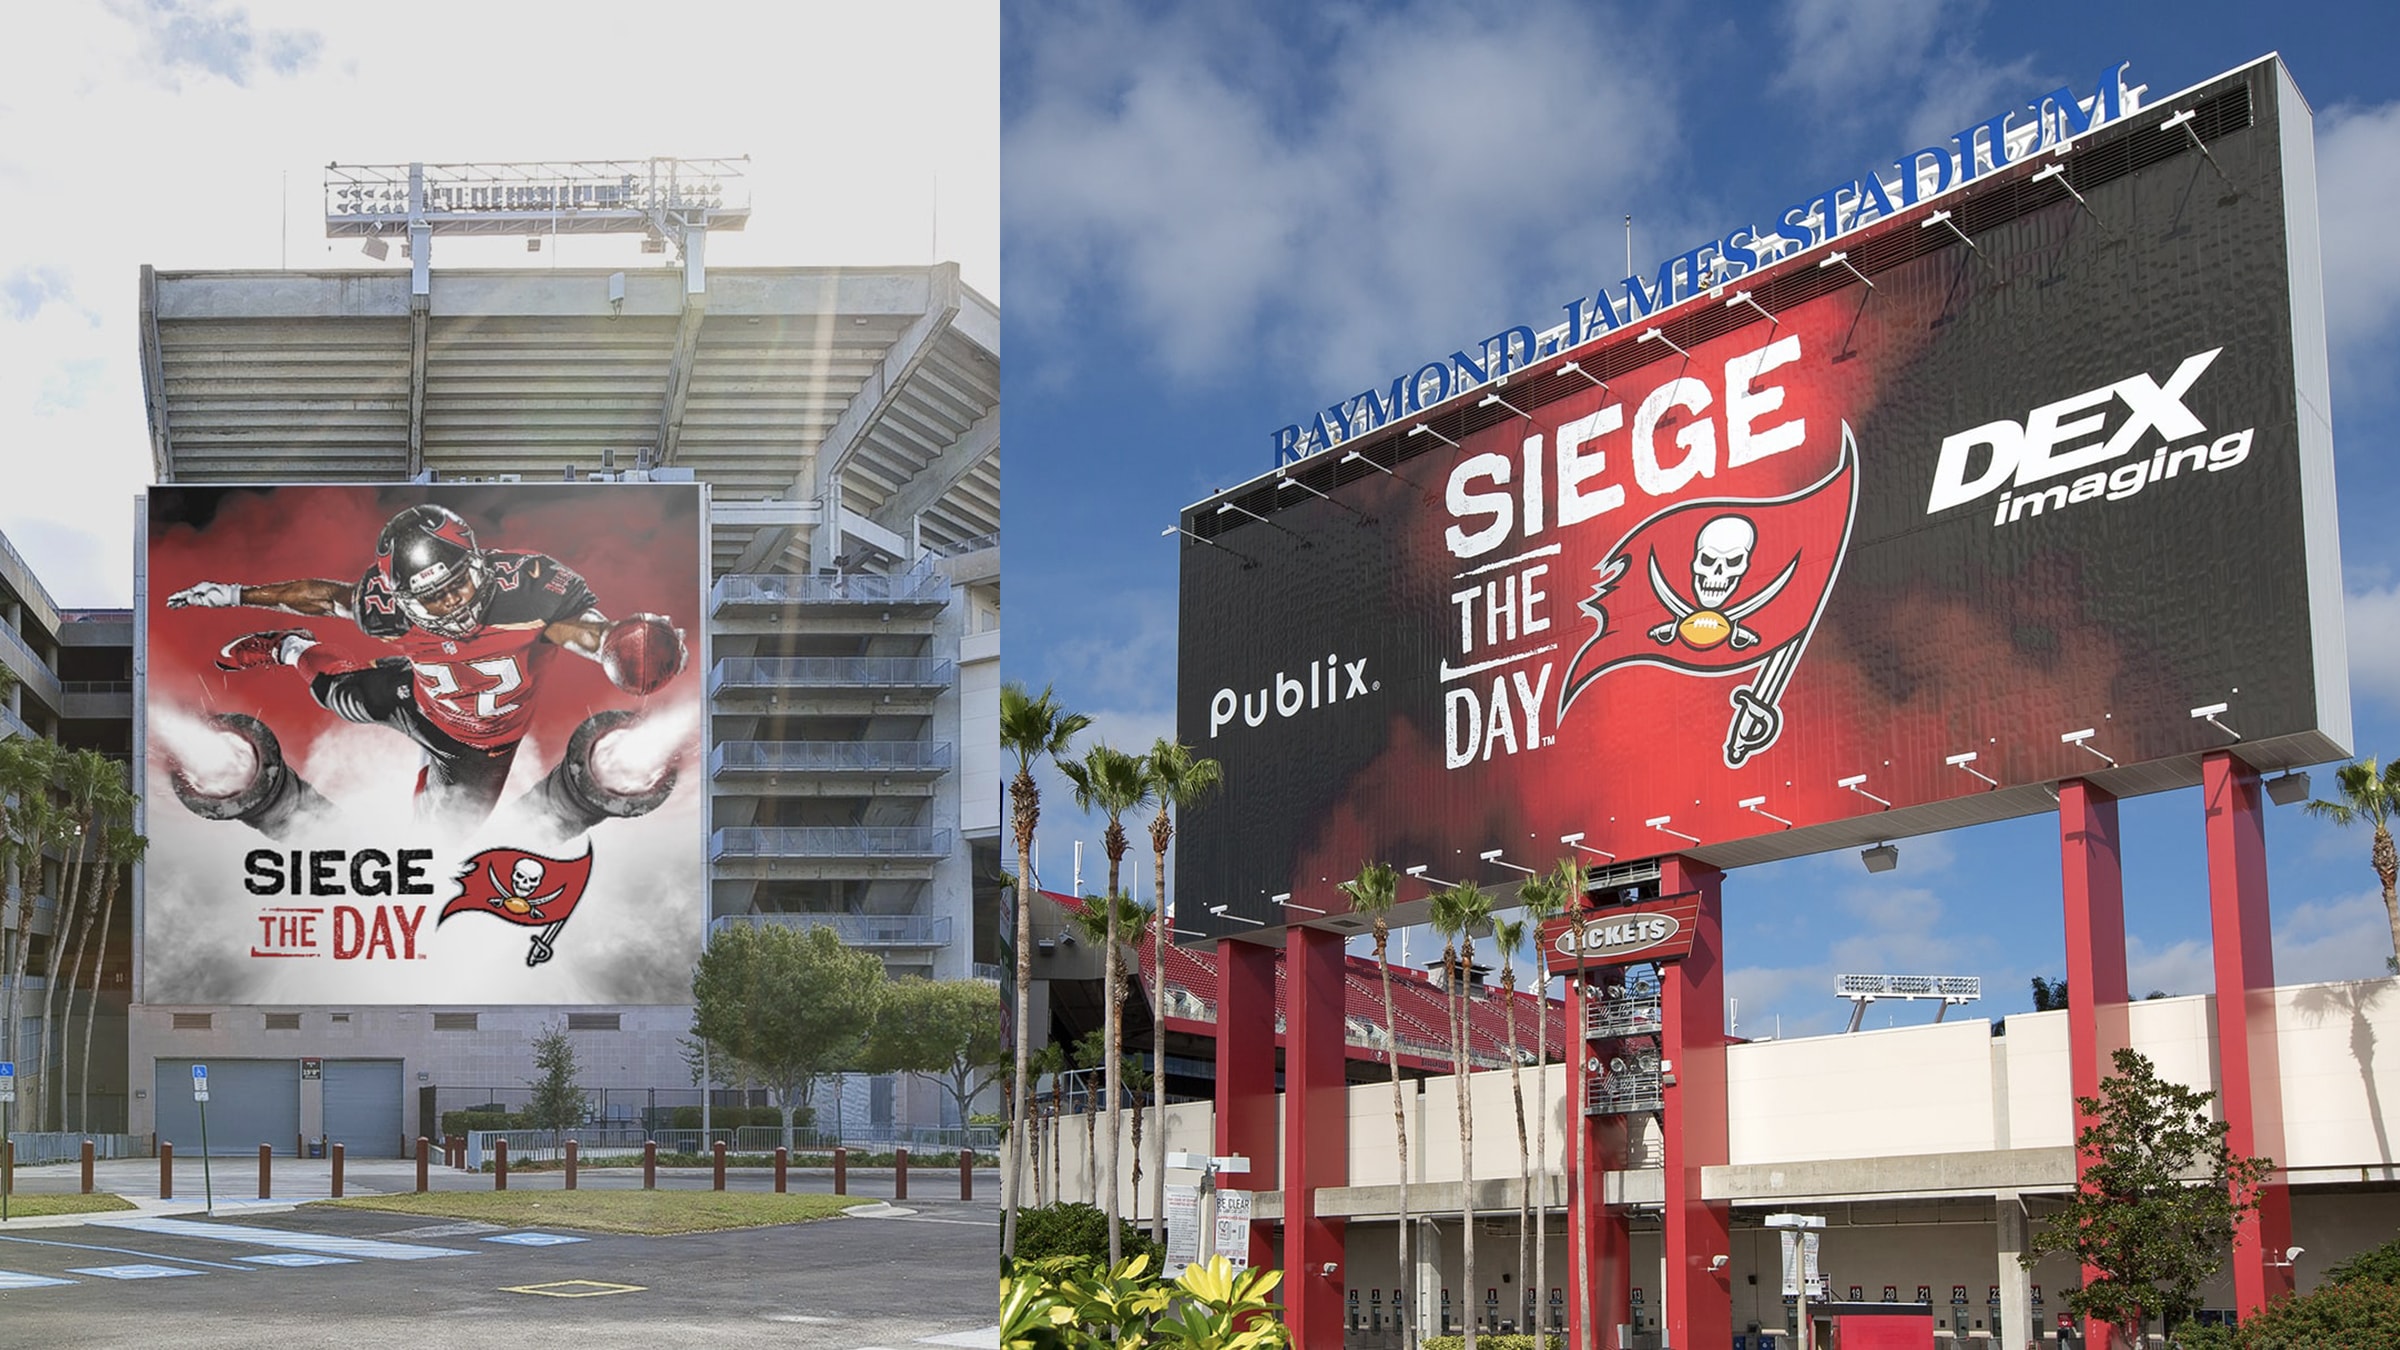 Photos of stadium with Siege the Day campaign art